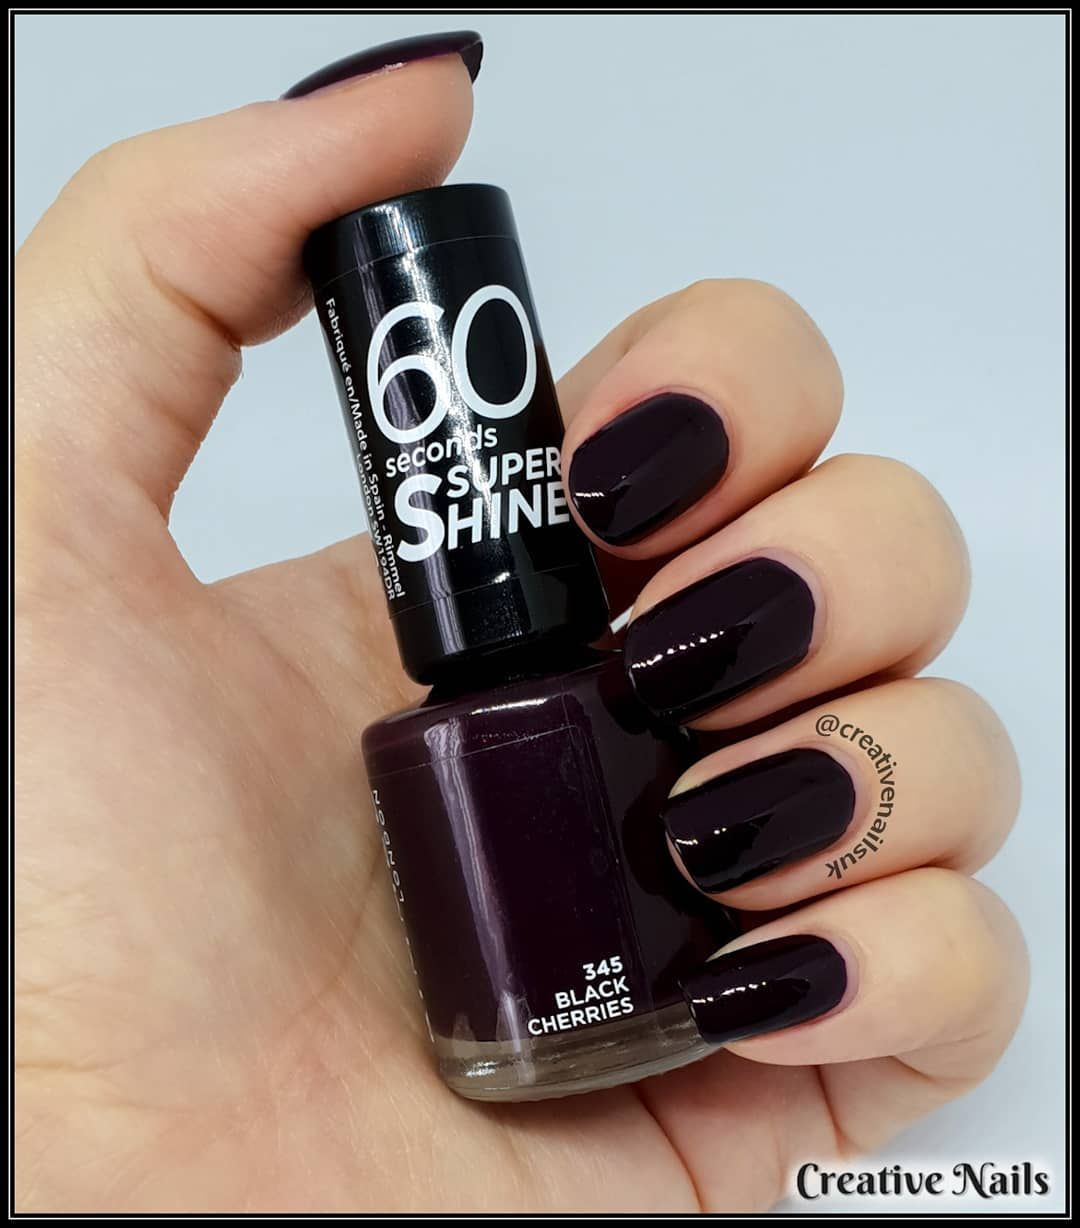 Rimmel London 60 Seconds Super Shine Black Cherries Such A Gorgeous Nail Polish Shade For Your Nails For A Dark Purple Nails Purple Nail Polish Nail Polish